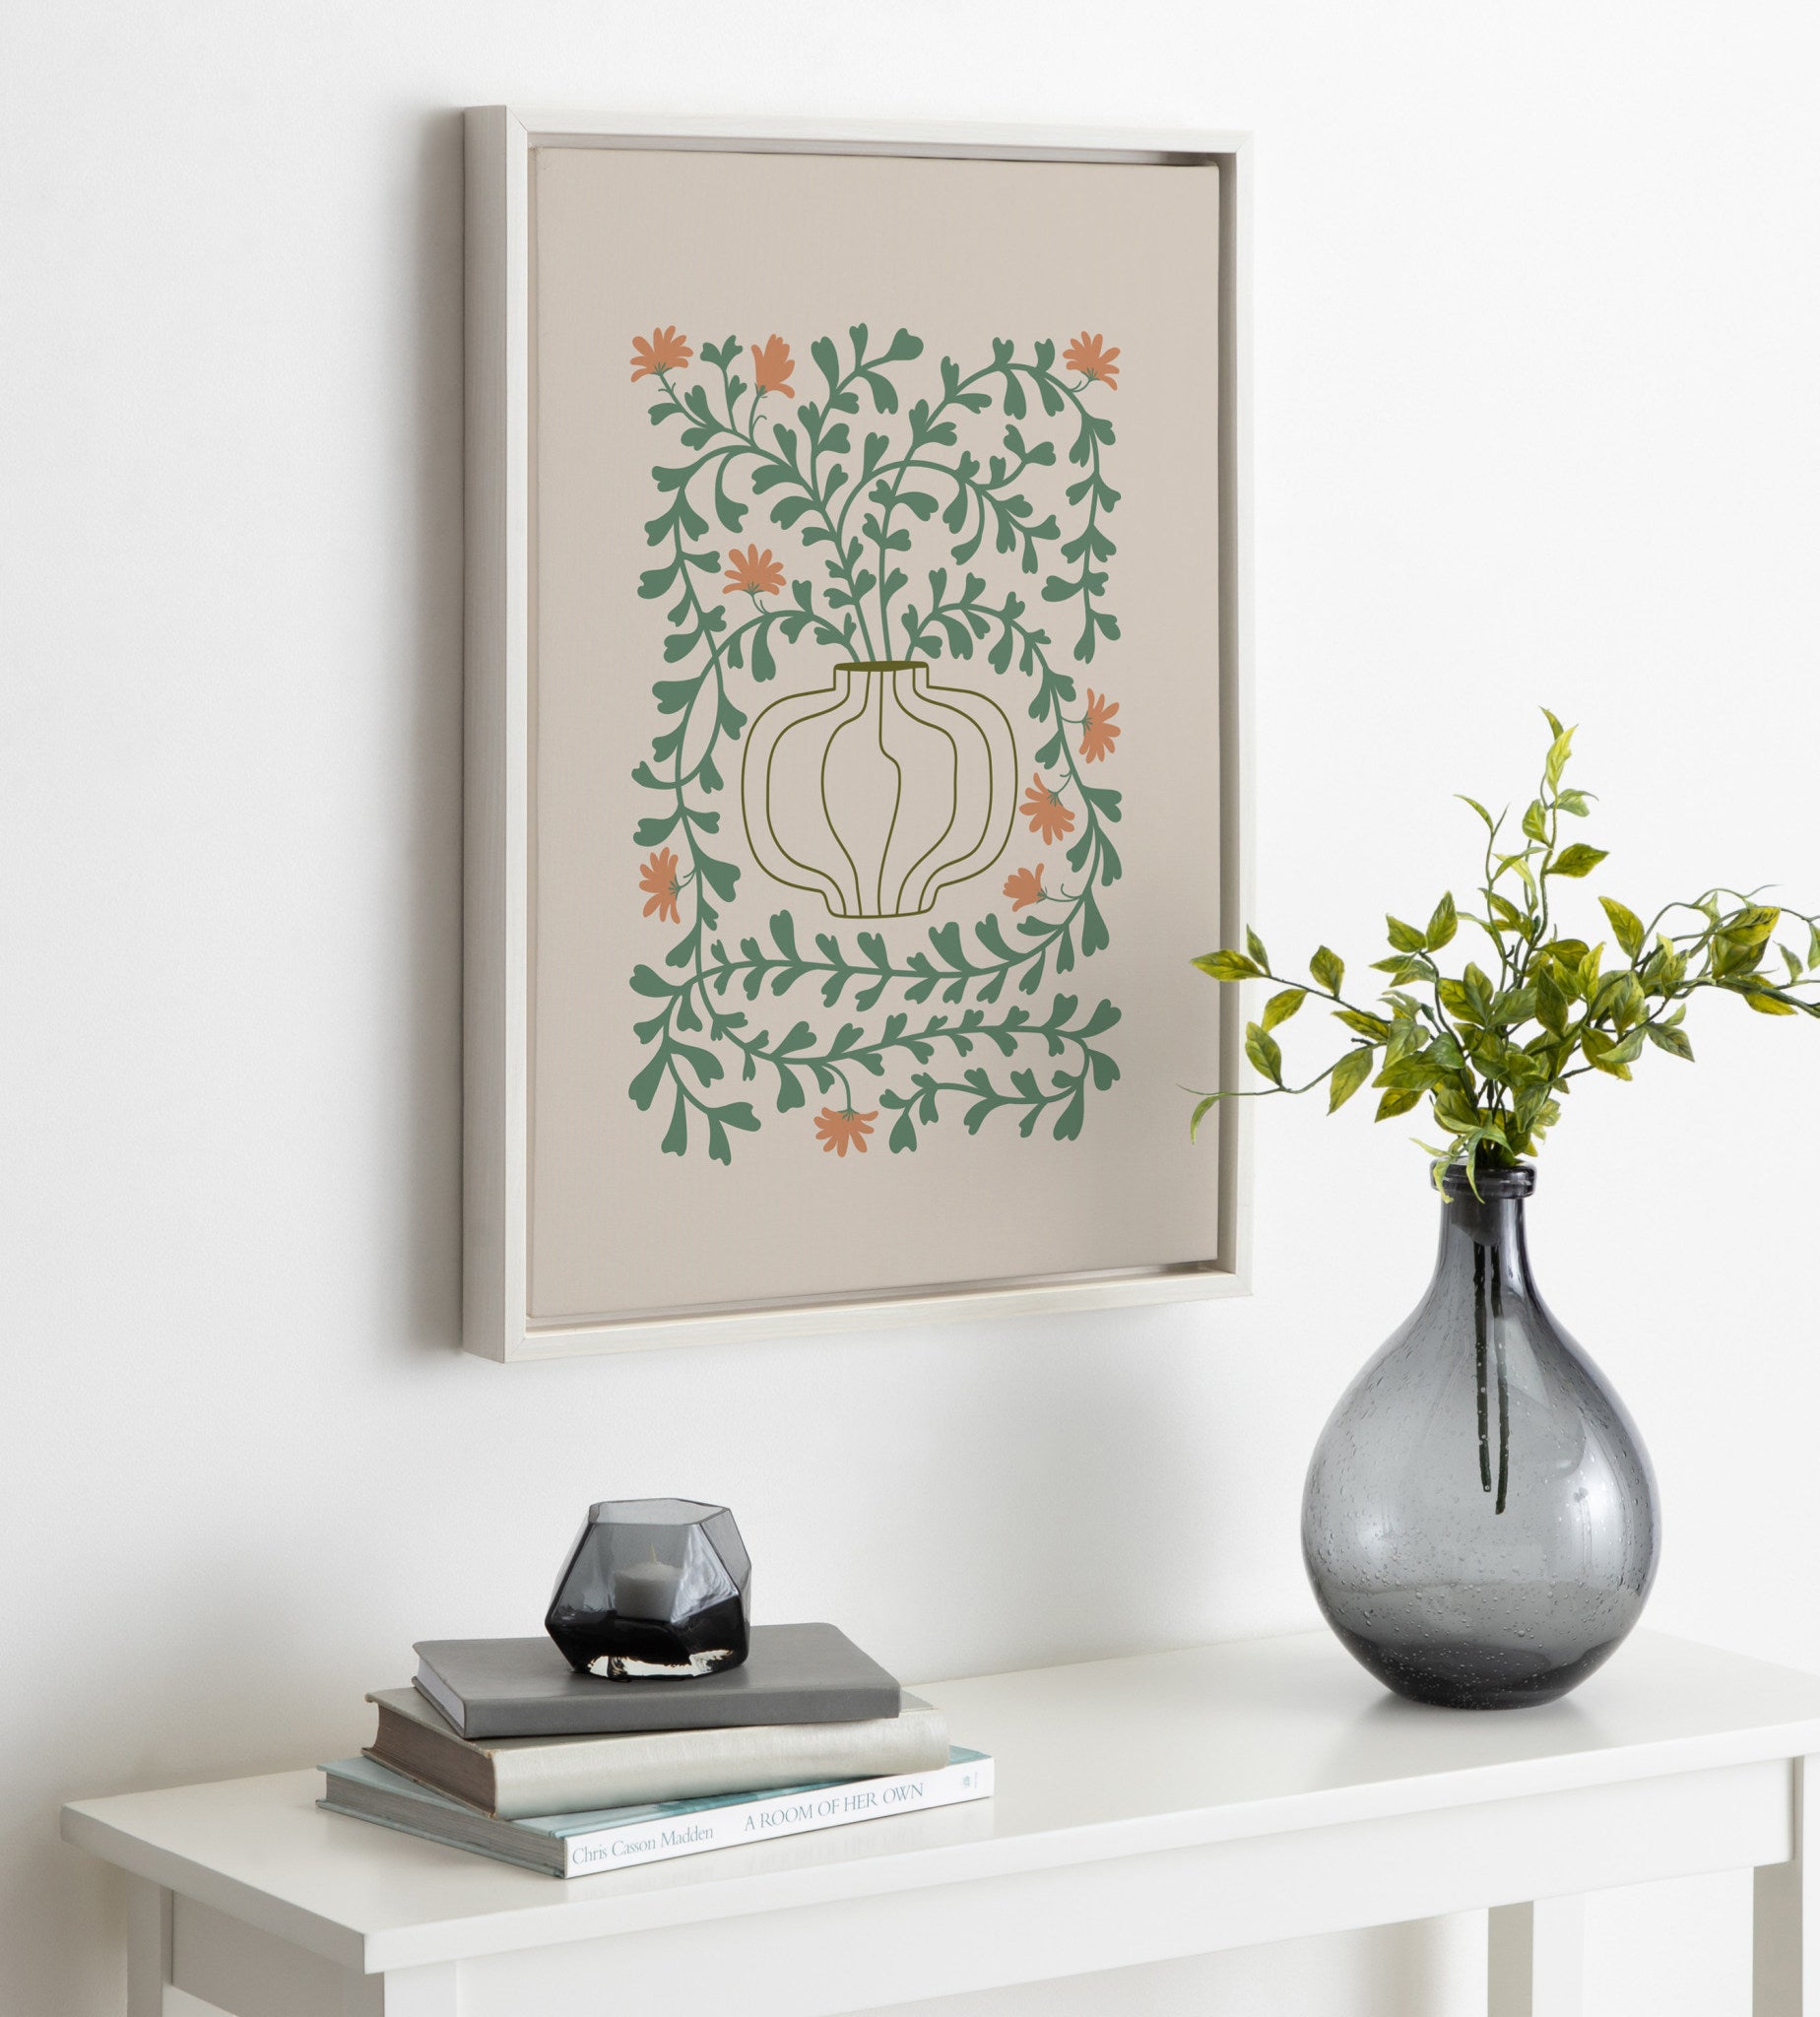 Sylvie Colorful Abstract Retro Floral Green and Orange Framed Canvas by The Creative Bunch Studio